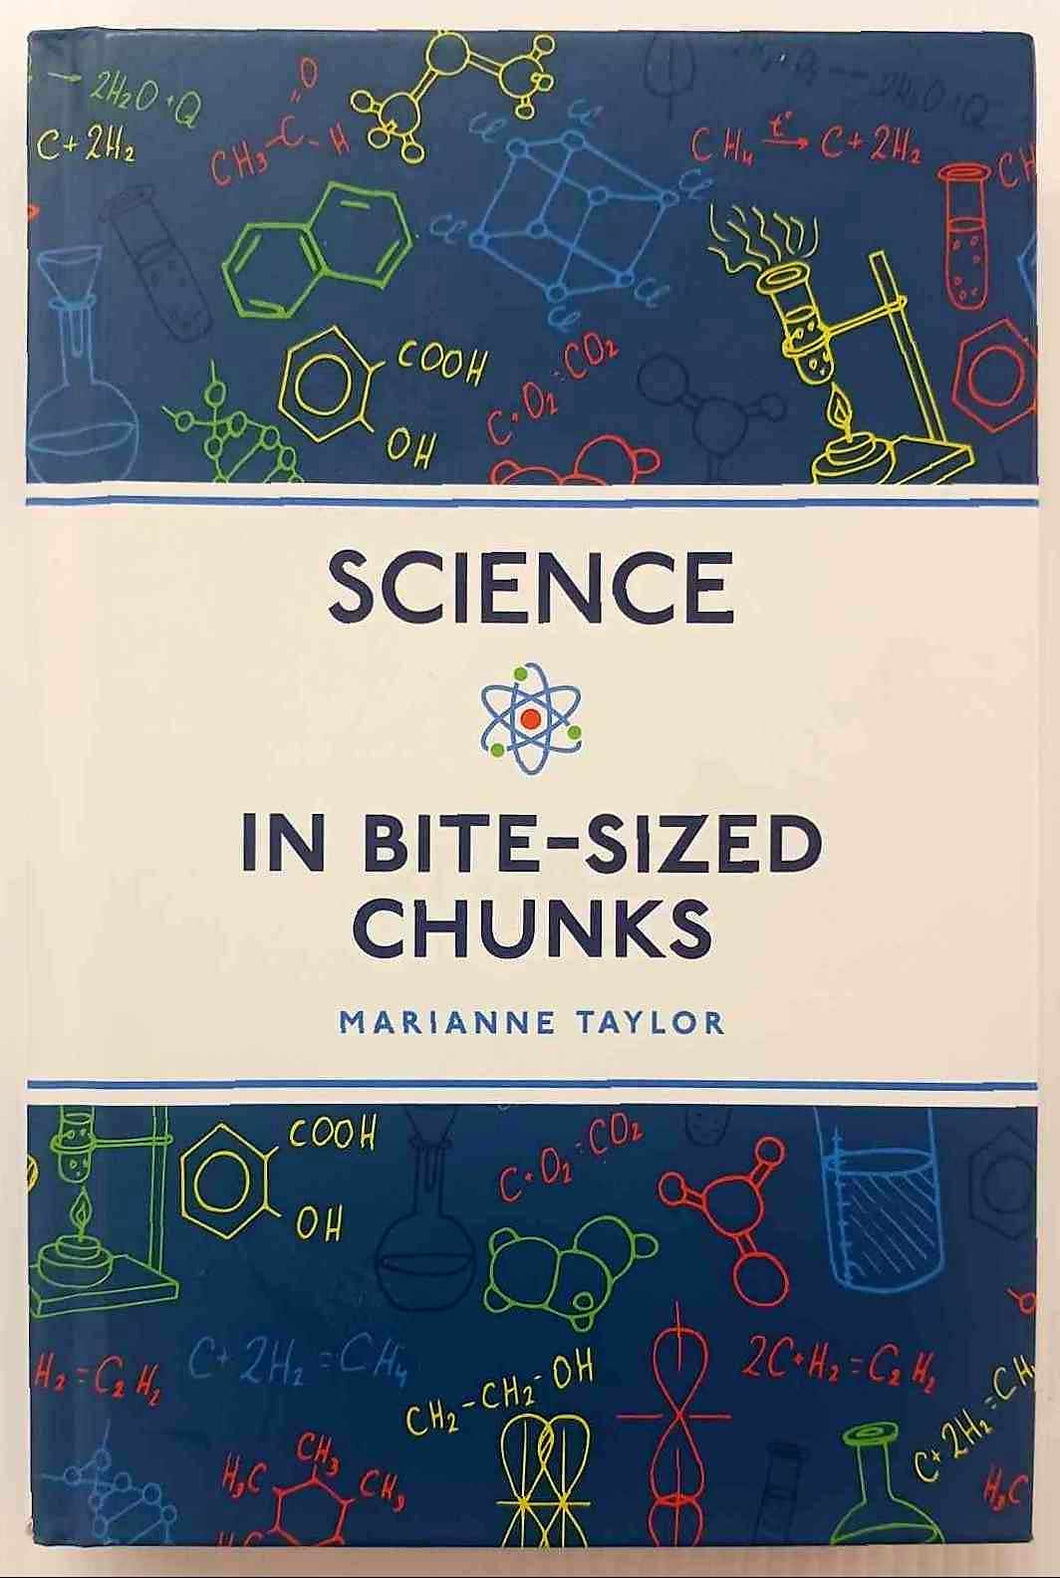 SCIENCE IN BITE-SIZED CHUNKS - Marianne Taylor